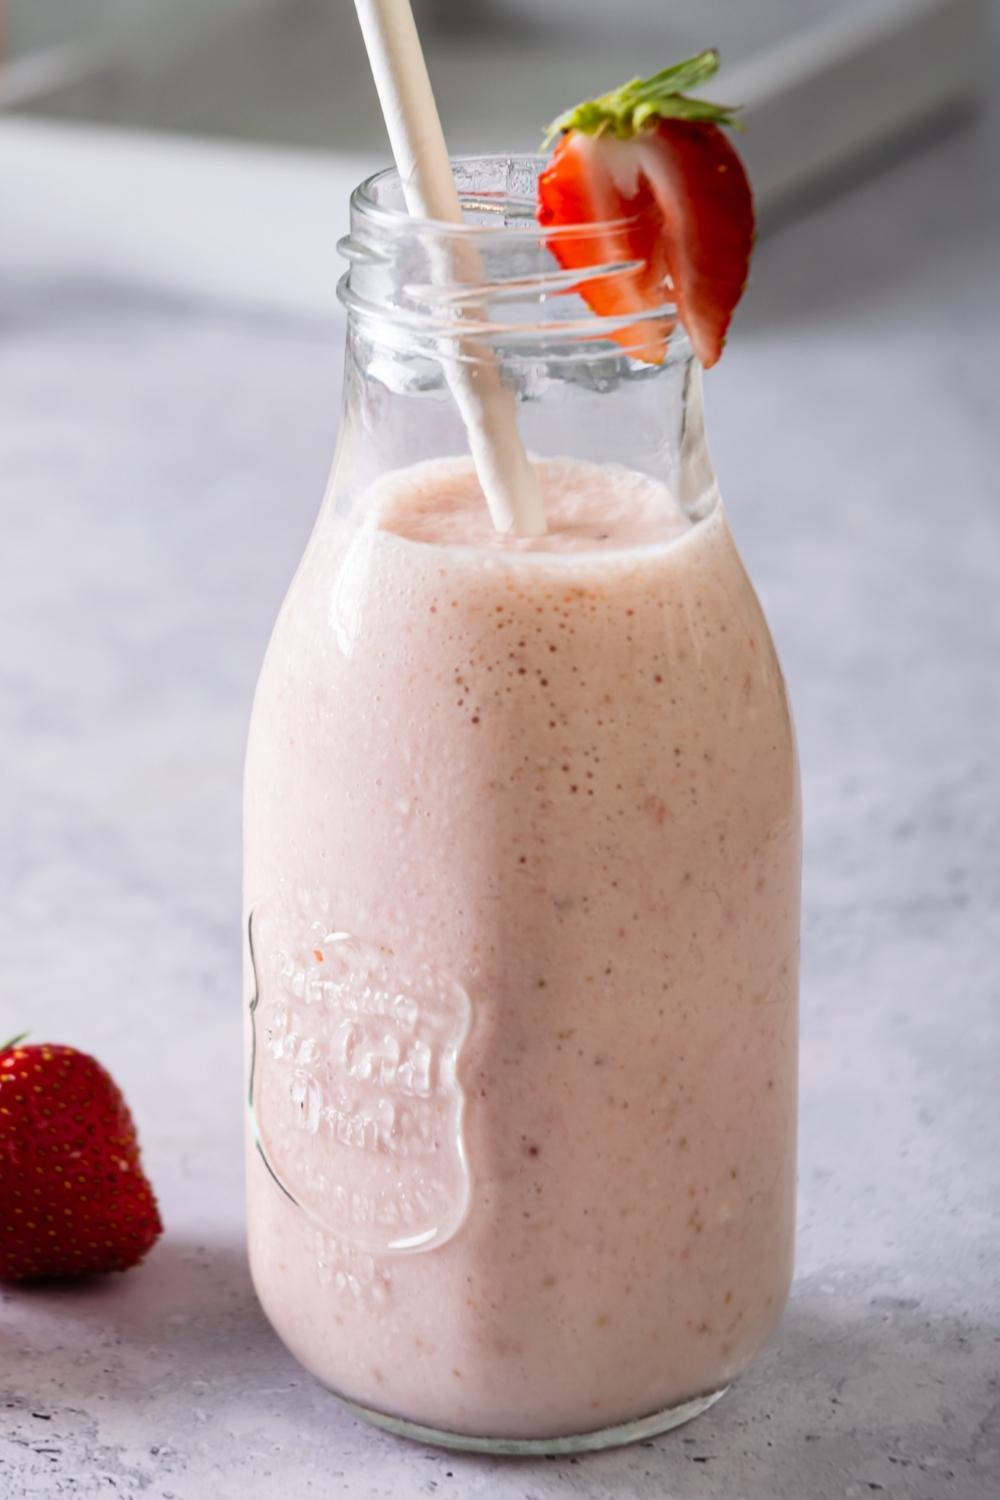 A glass filled with a strawberry banana smoothie.